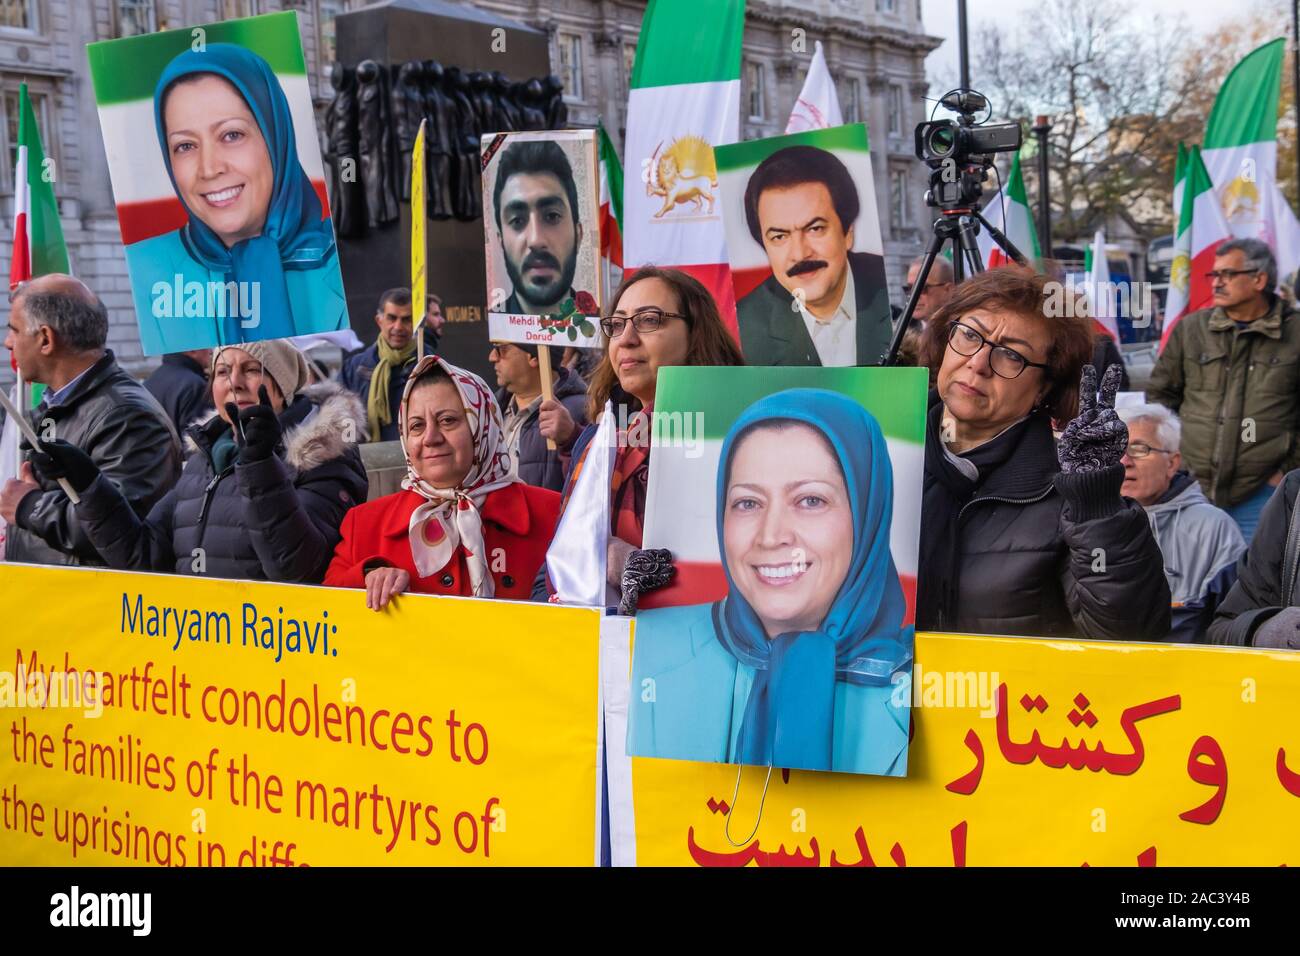 London, UK. 30th Nov, 2019. Anglo-Iranian Communities in the UK and supporters of the People's Mujahedin of Iran's National Council of Resistance of Iran rally at Downing St in support of protests in Iran against the clerical regime. Over 450 protesters have been killed in the brutal suppression of the Iran protests by security forces, with 4000 injured and thousands arrested. There were speeches and songs and a street theatre re-eneactment of the killings and but an attempt to deliver a letter to the Prime Minister was refused entry. Credit: Peter Marshall/Alamy Live News Stock Photo